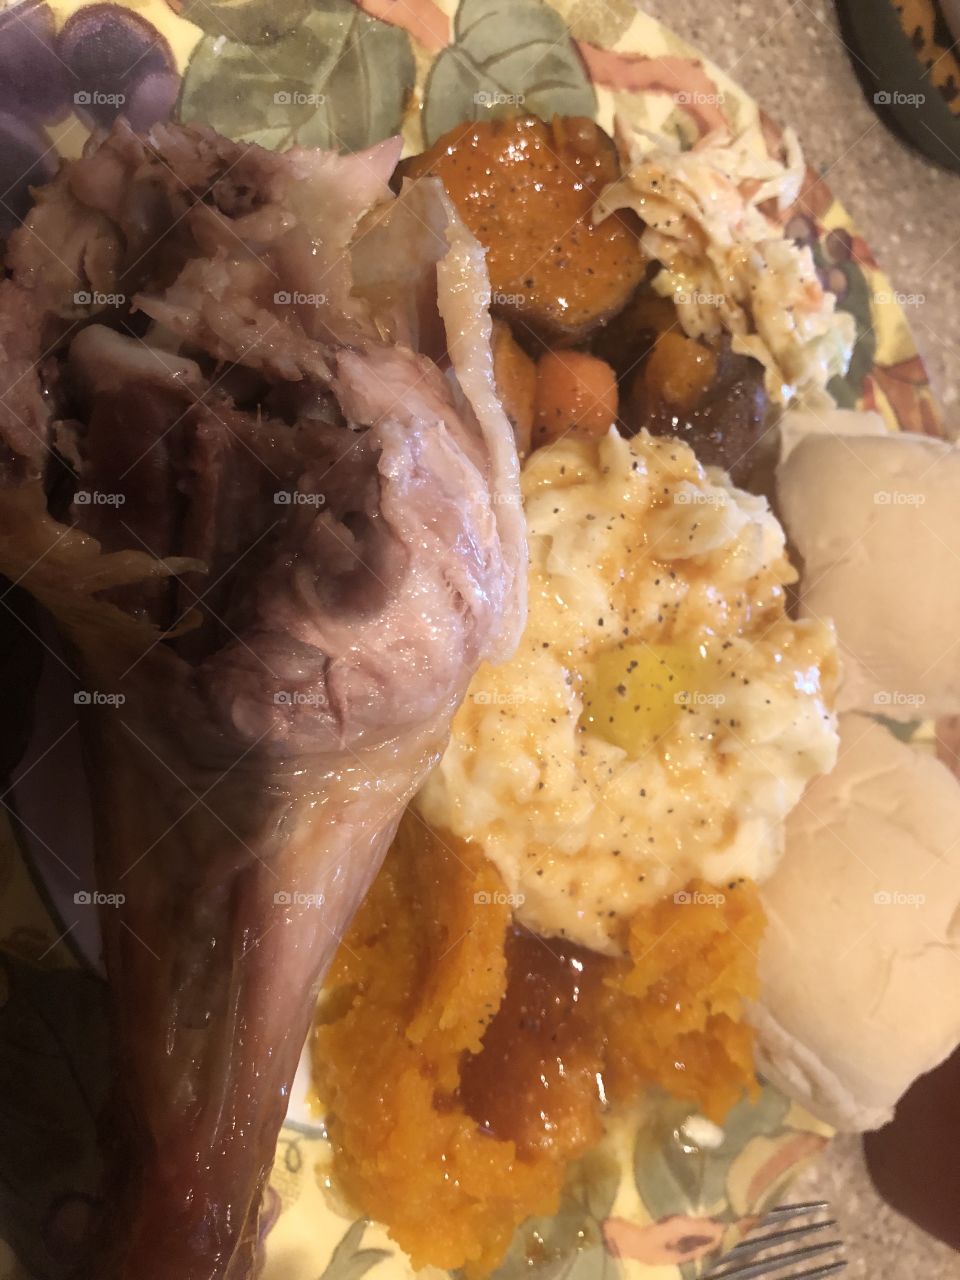 A delicious Thanksgiving day plate of food